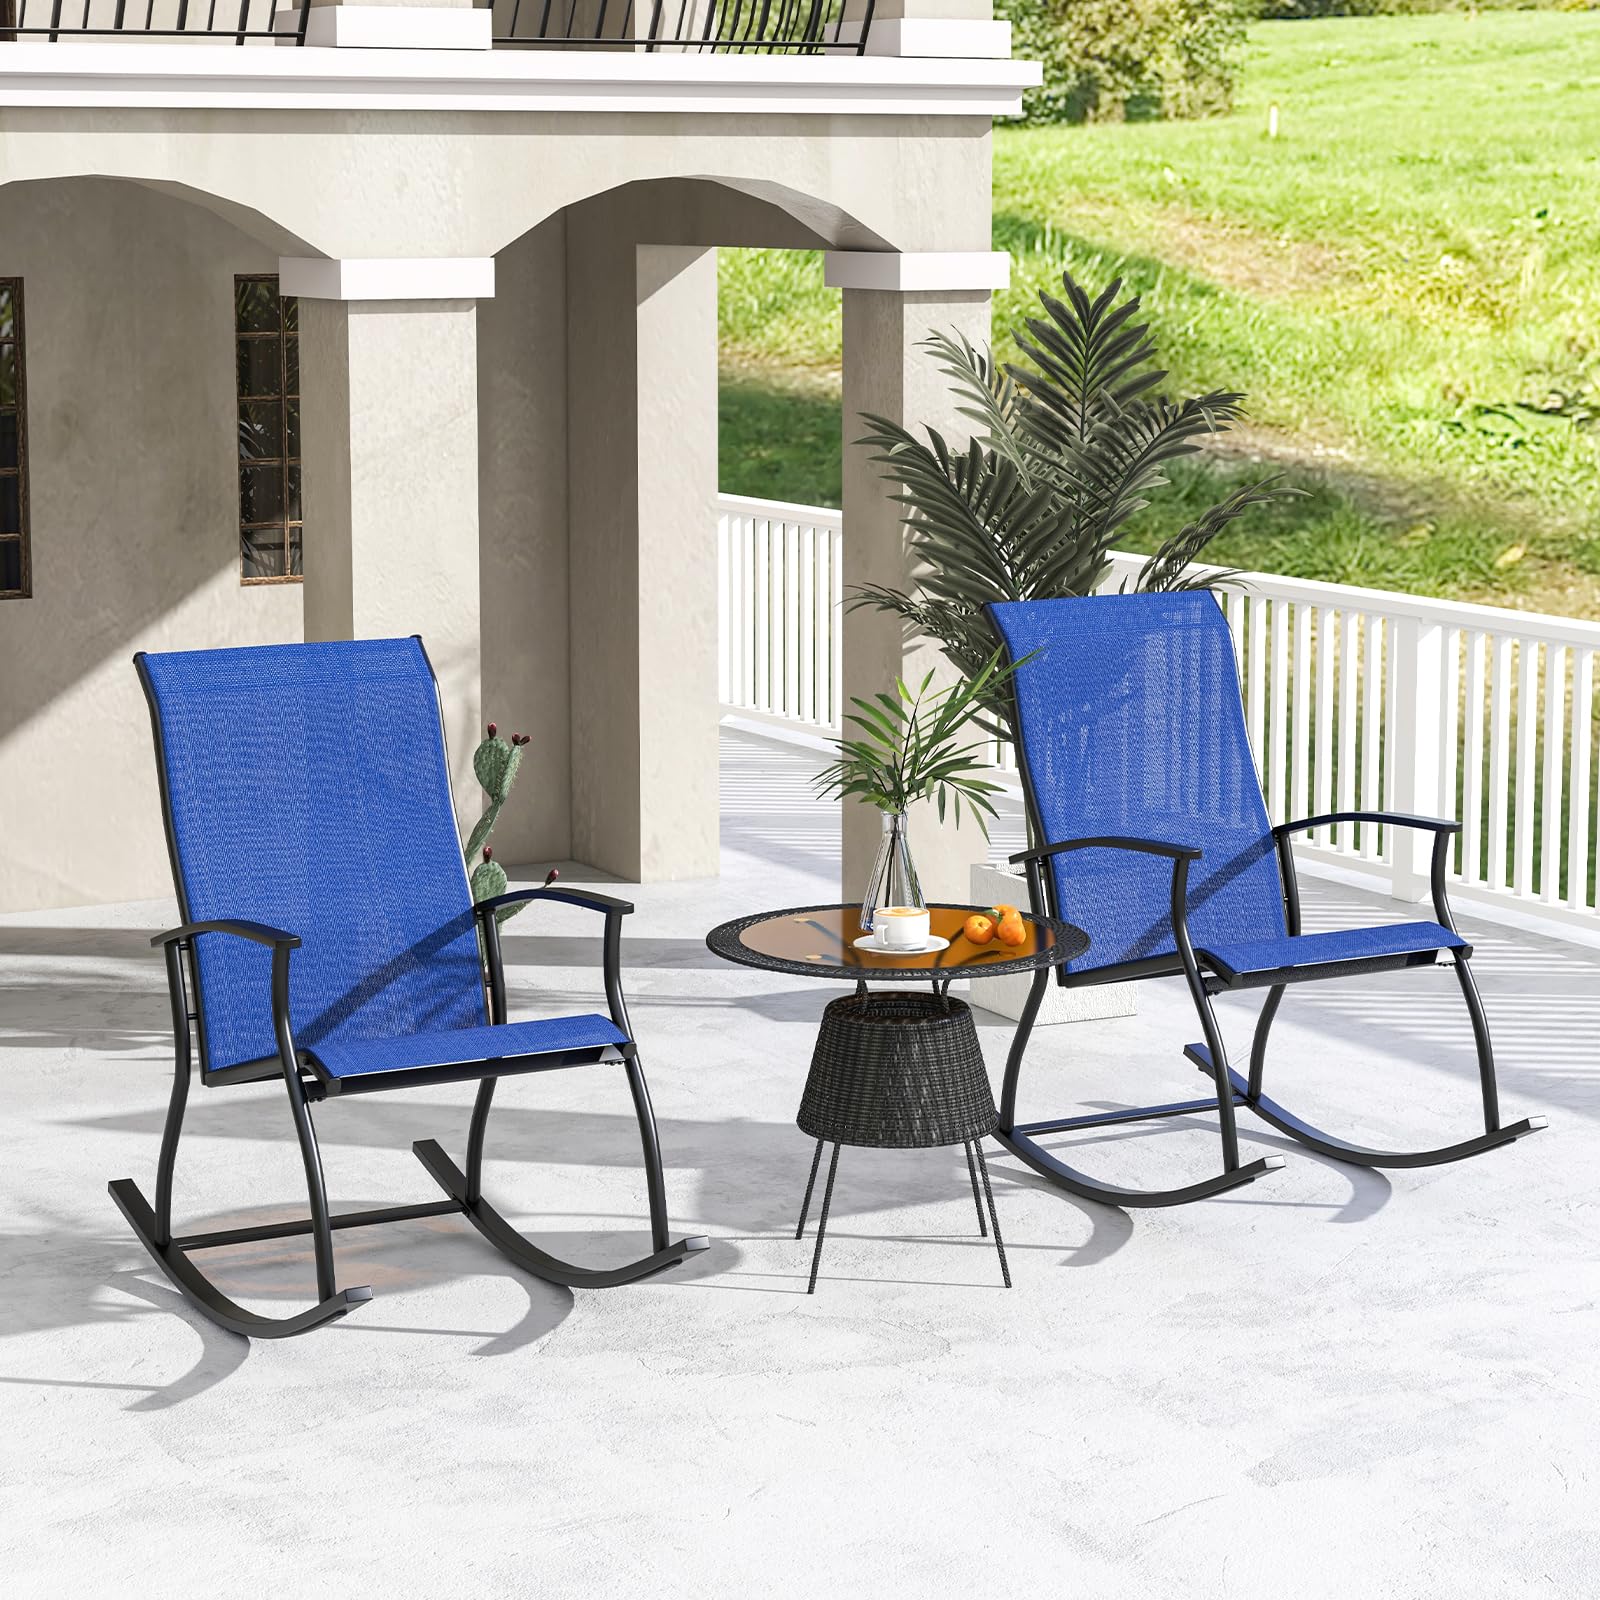 Giantex Outdoor Rocking Chair Set of 2 - Patio Rocking Chairs w/Breathable Backrest, Navy